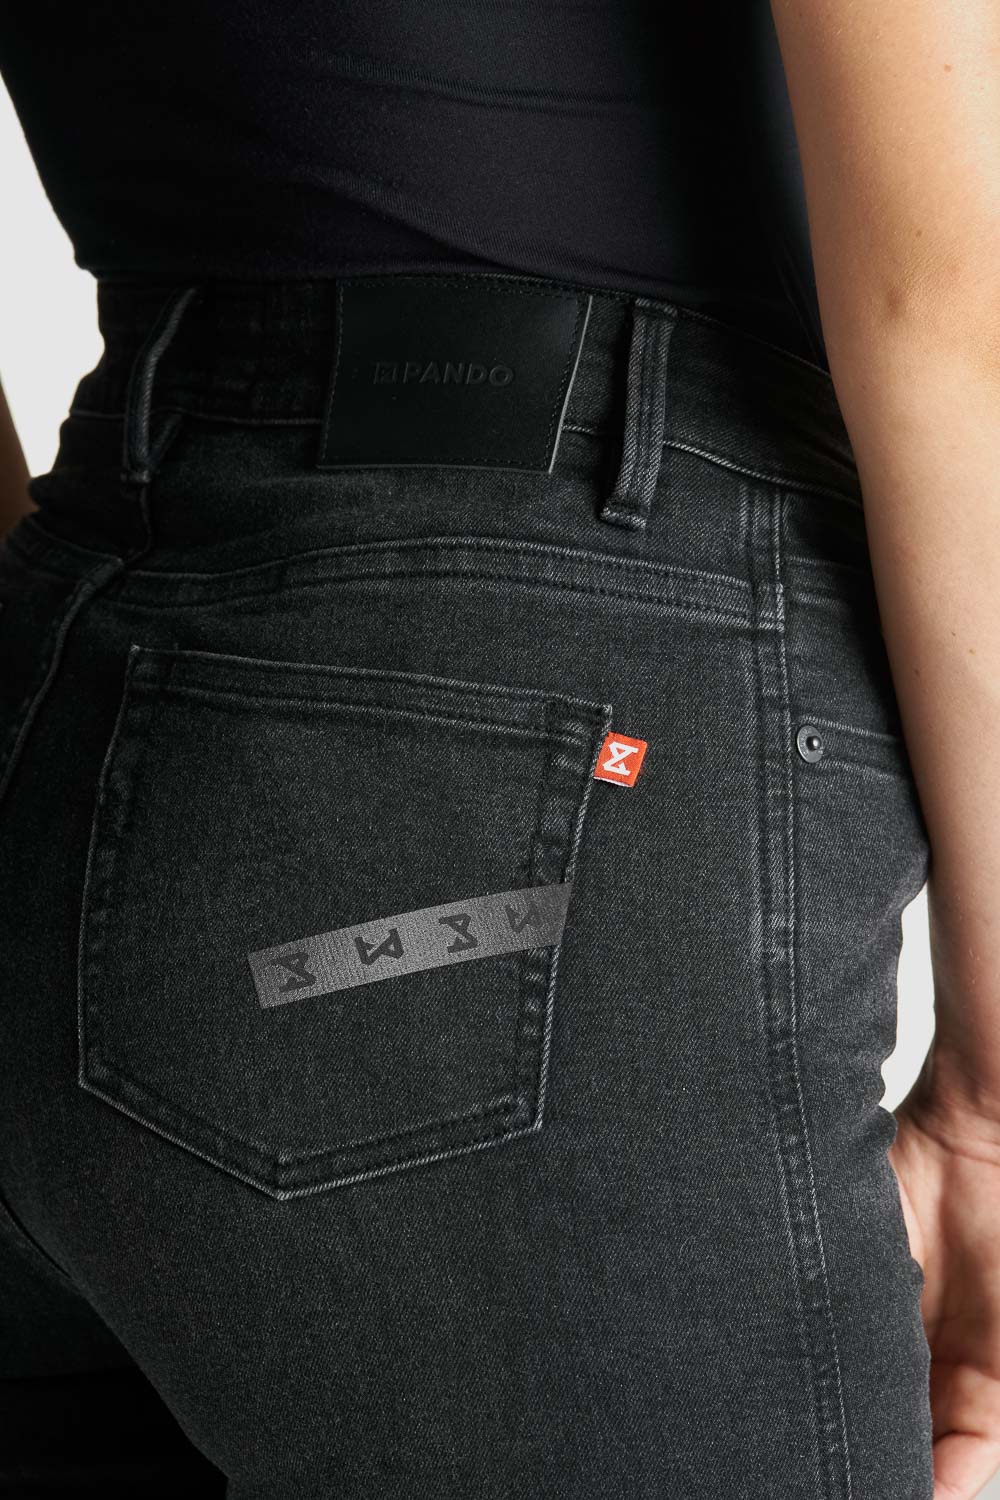 A close up of a woman&#39;s waist wearing black high waist motorcycle jeans